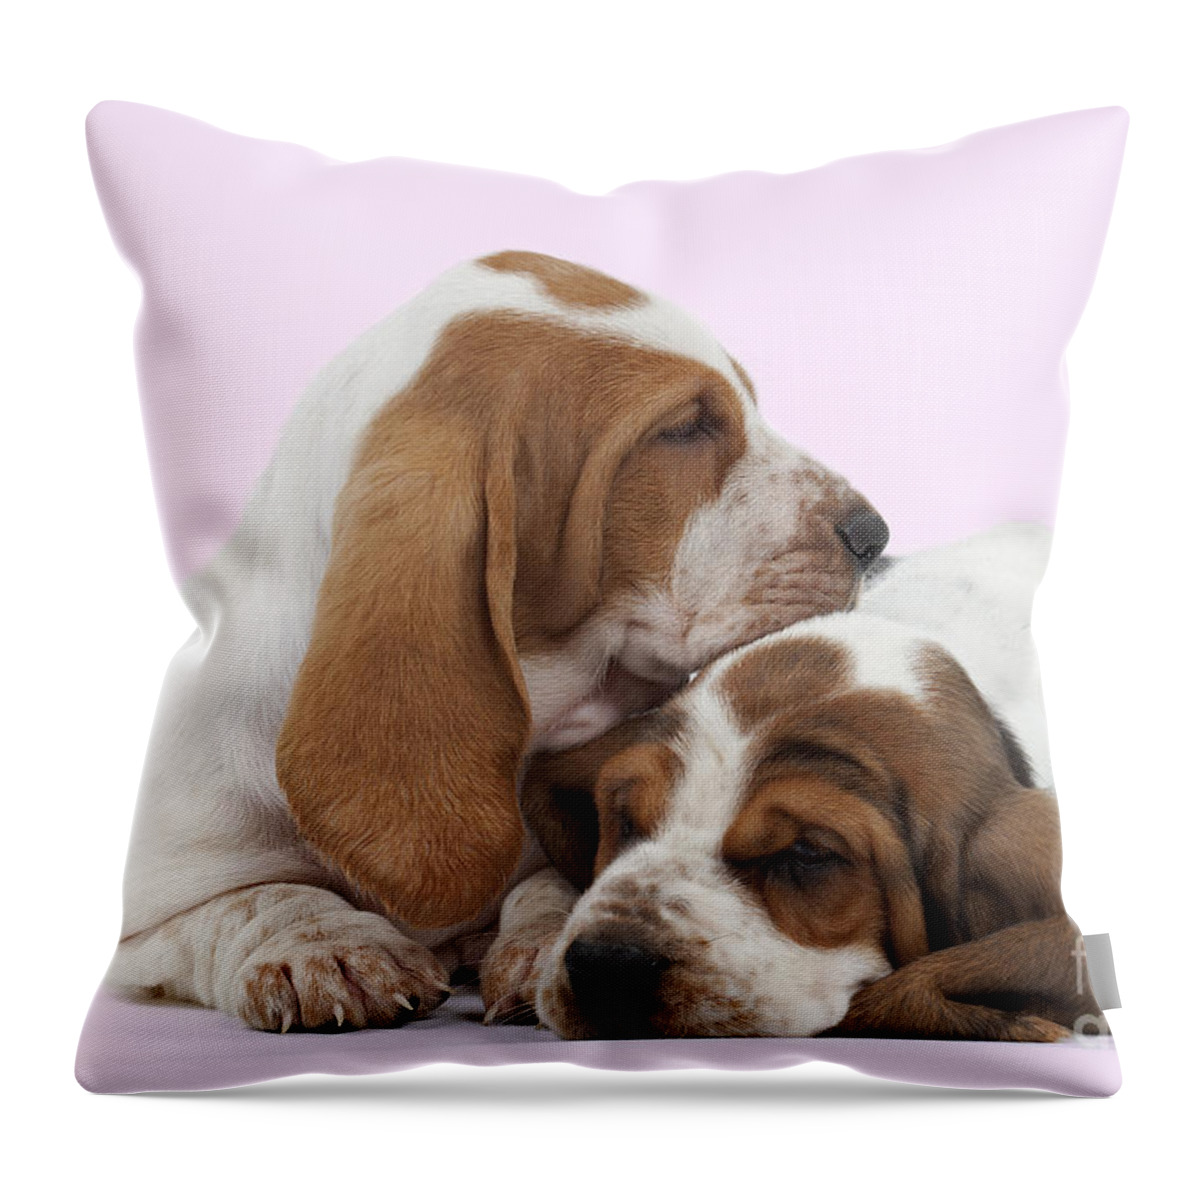 Dog Throw Pillow featuring the photograph Basset Hound Puppies by Jean-Michel Labat